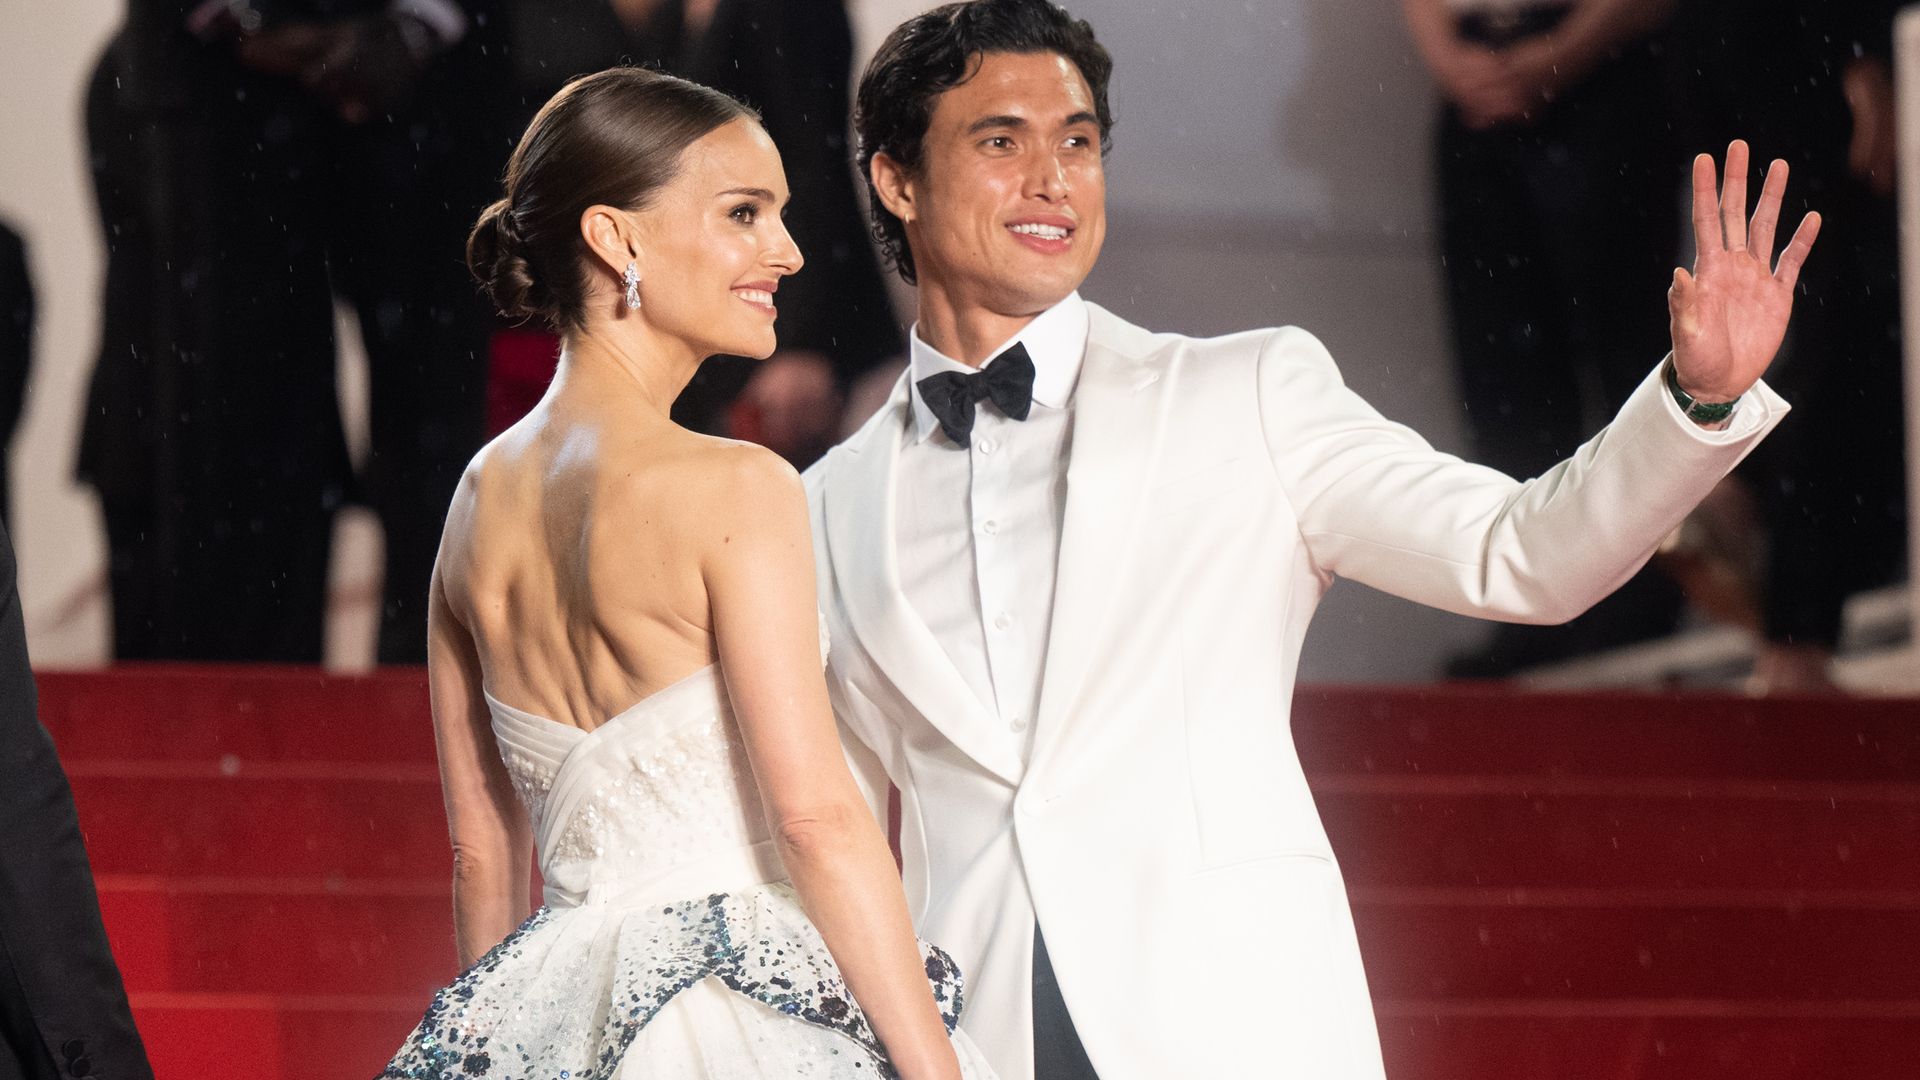 Natalie Portman and her co-star Charles Melton attend the May December red carpet screening at the Cannes Film Festival 